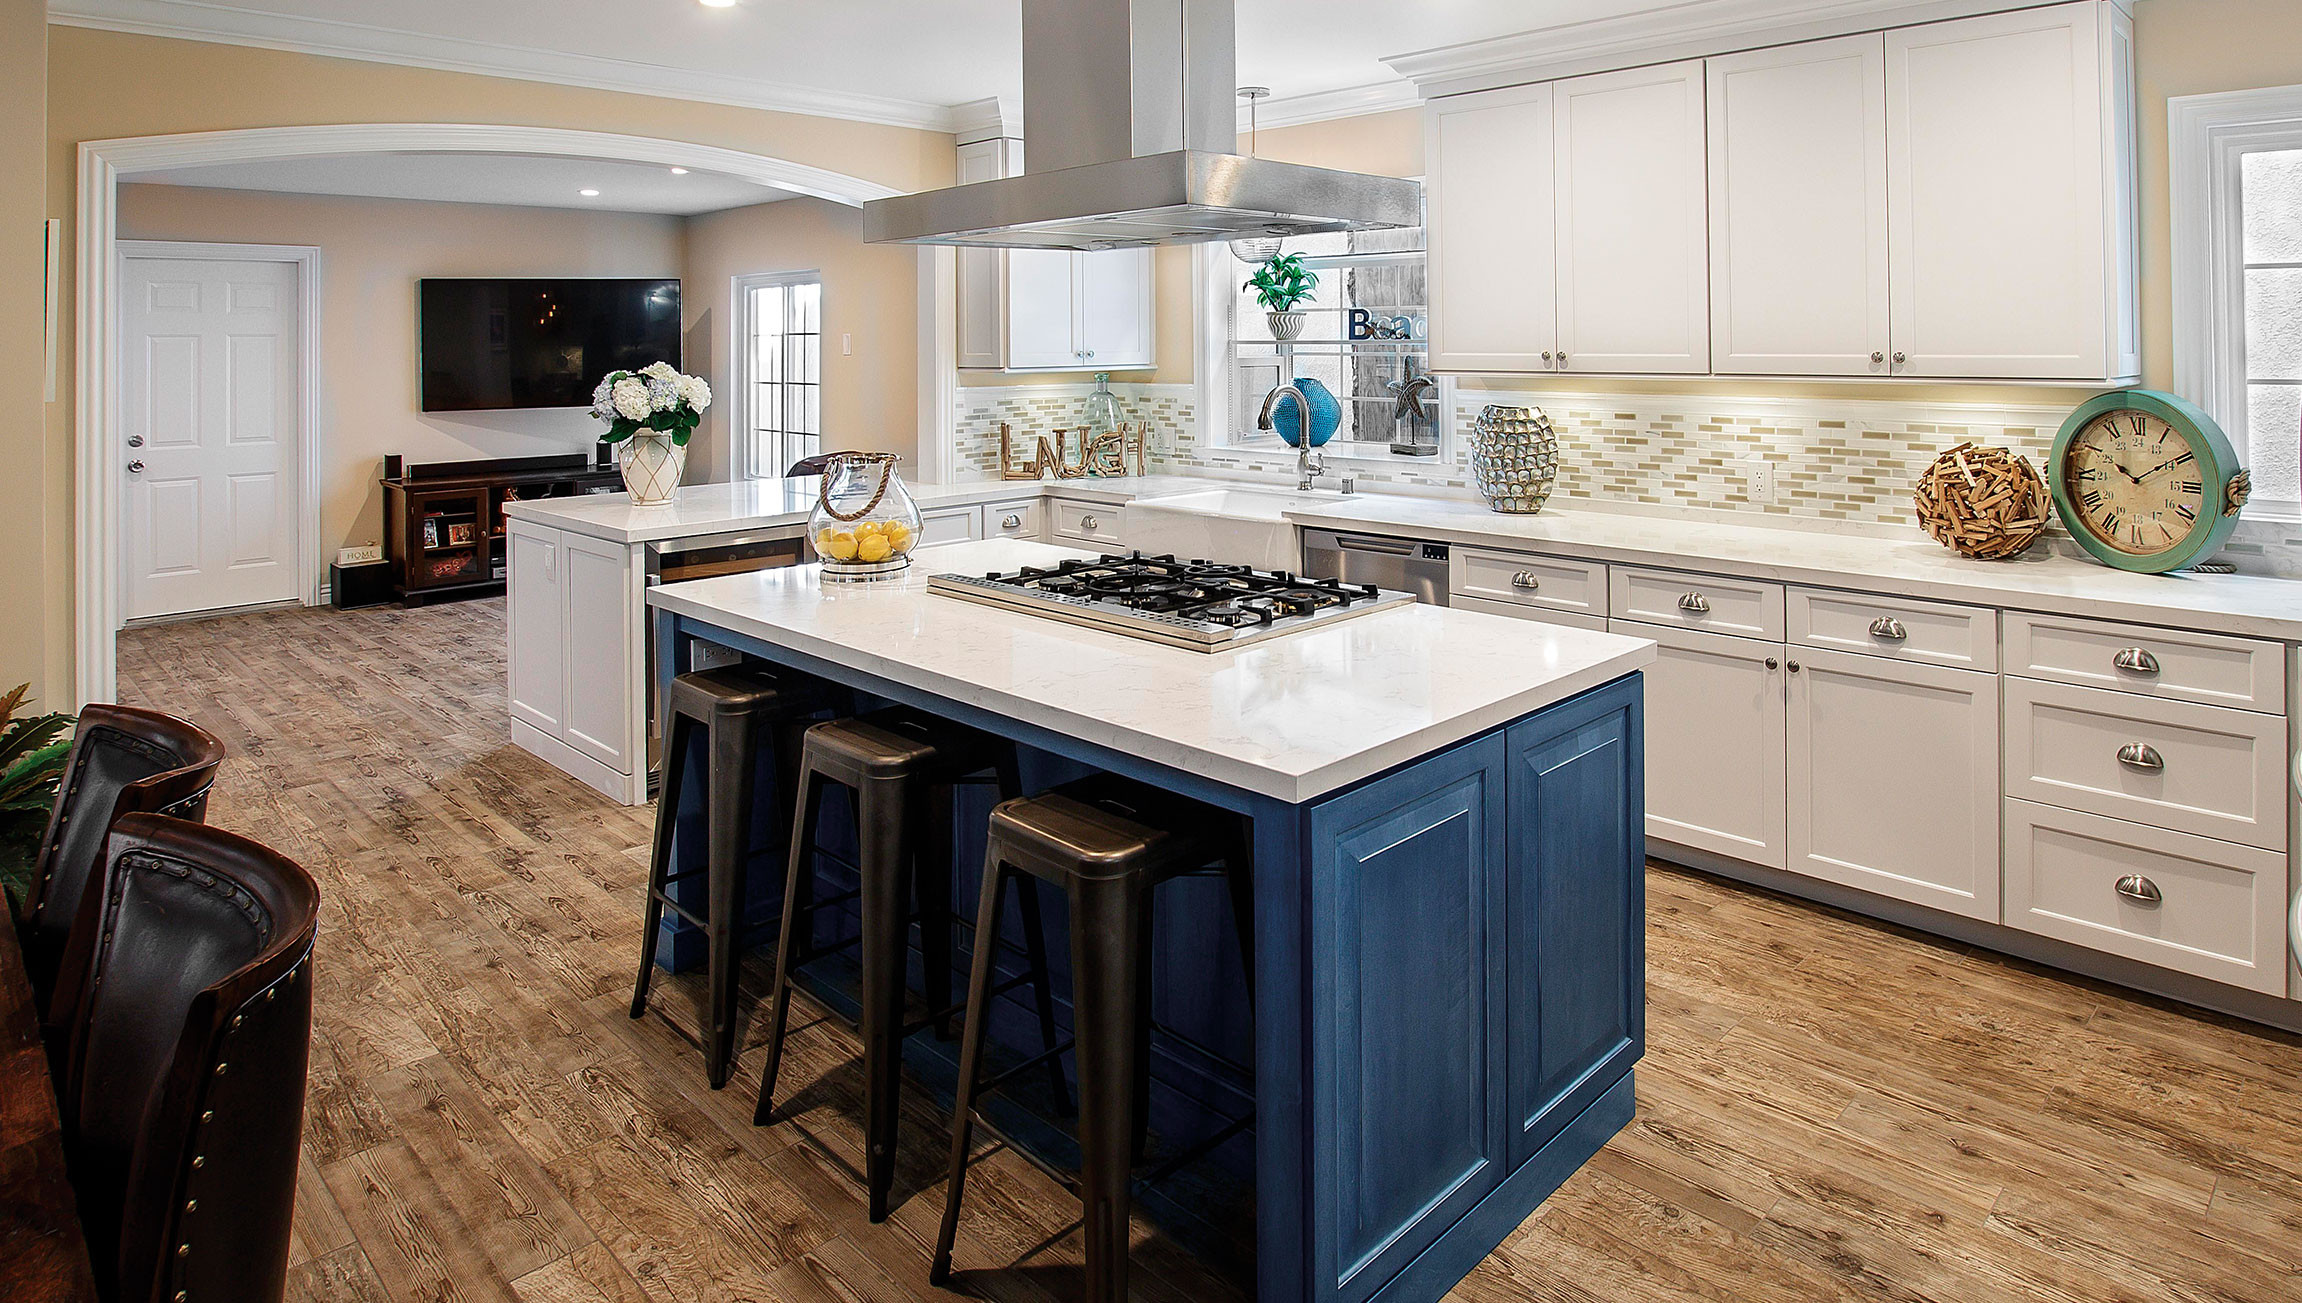 Kitchen Cabinets And Islands
 Kitchen Island Cabinets in Blue